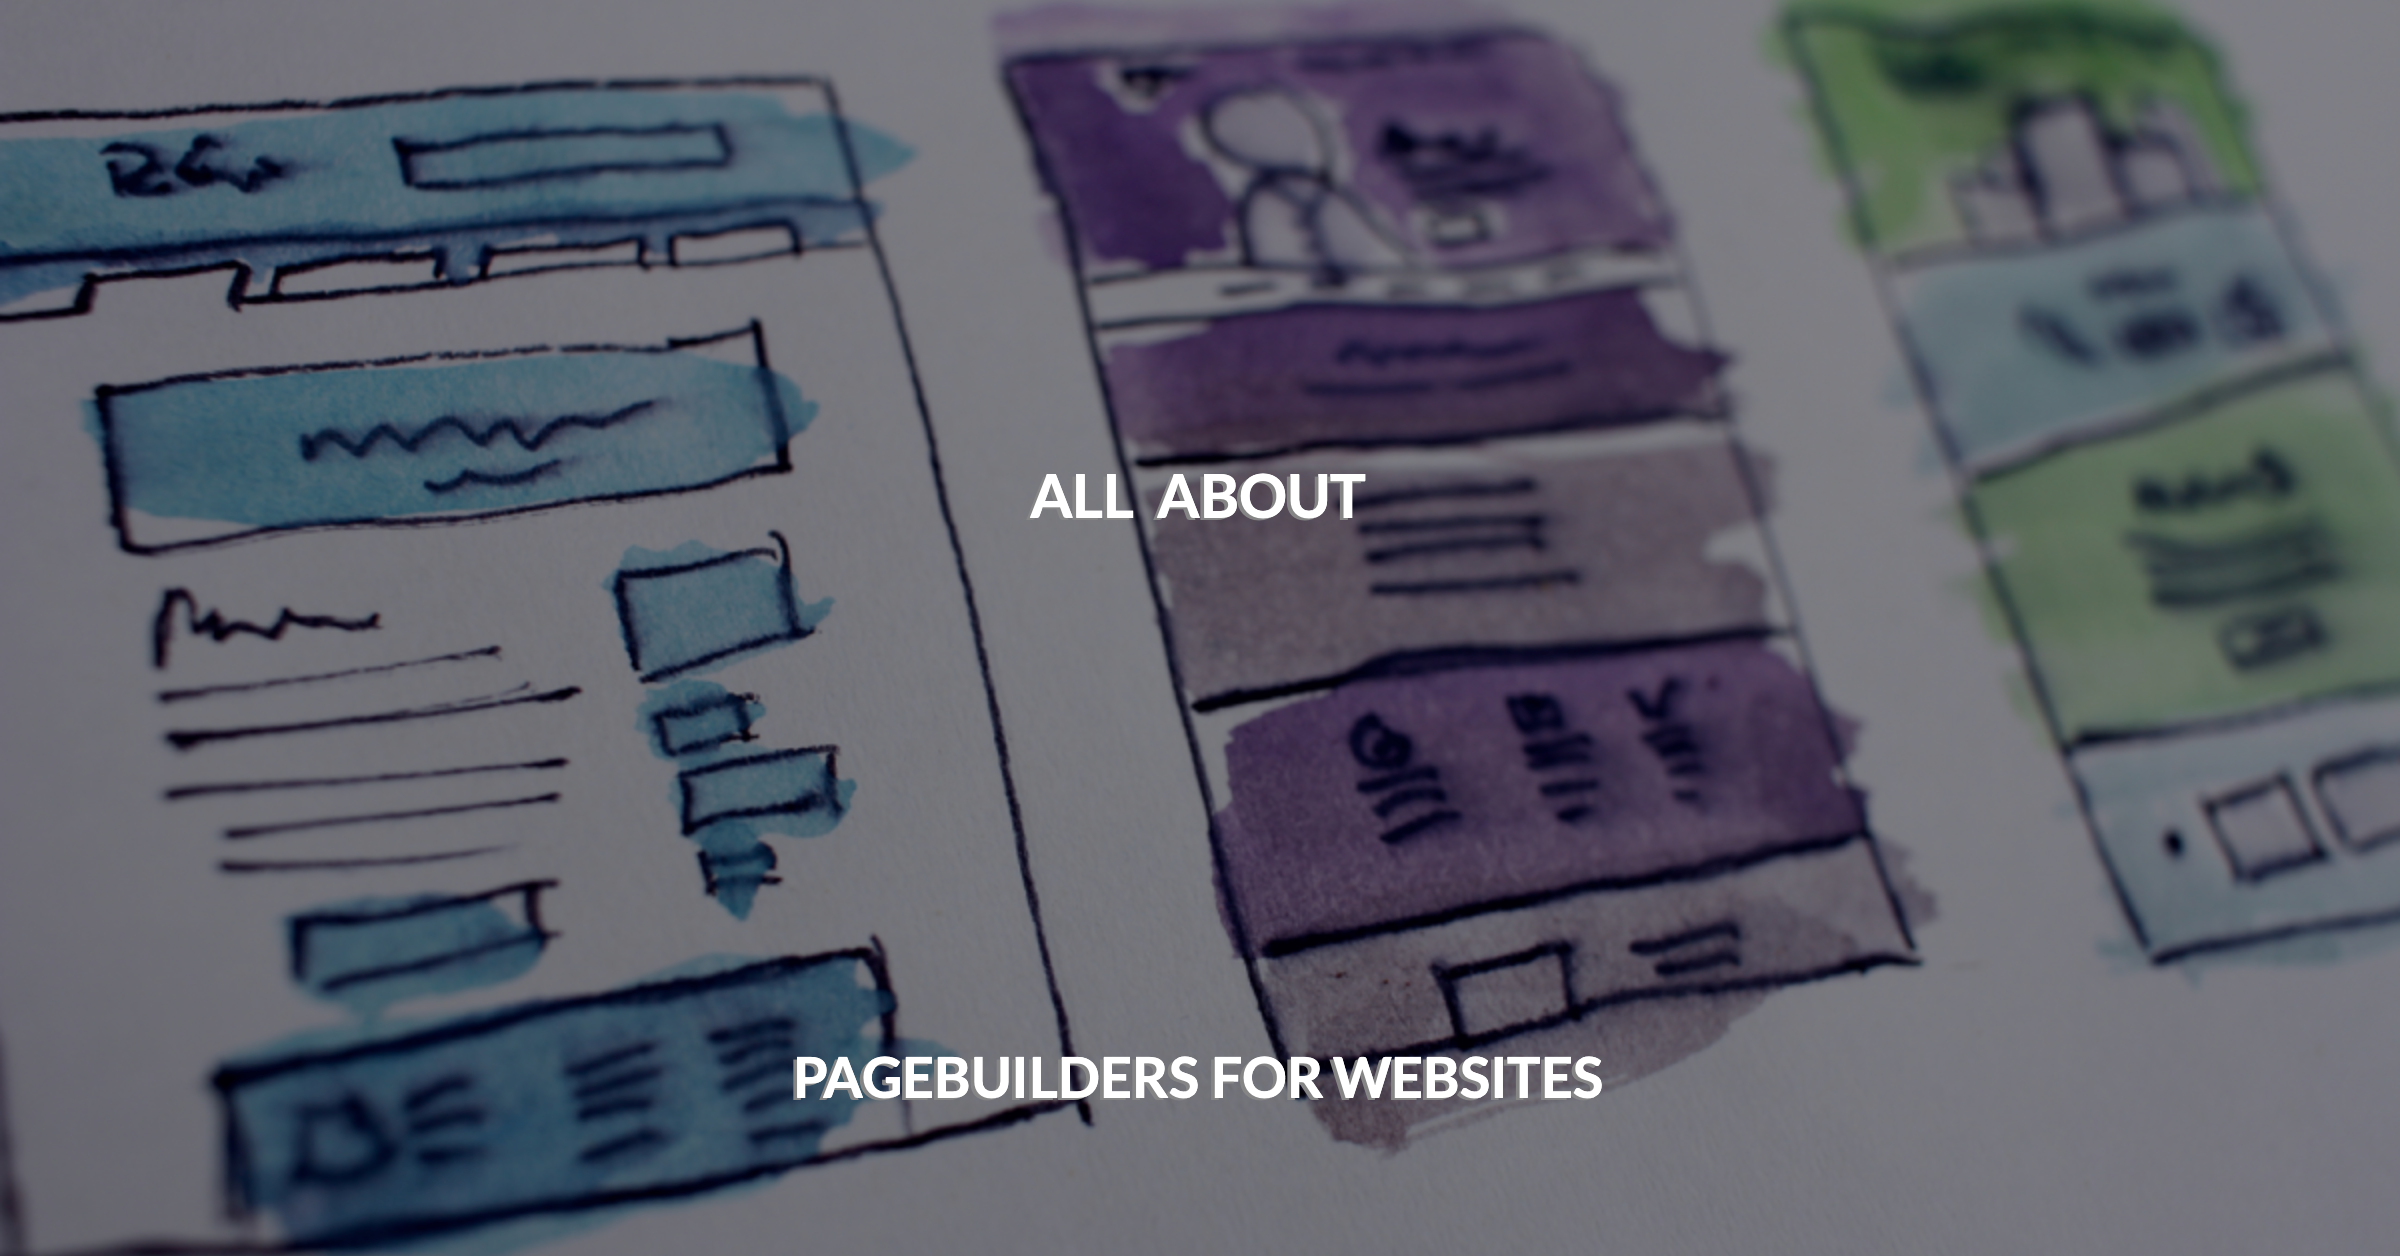 Cover Image for post on Pagebuilders